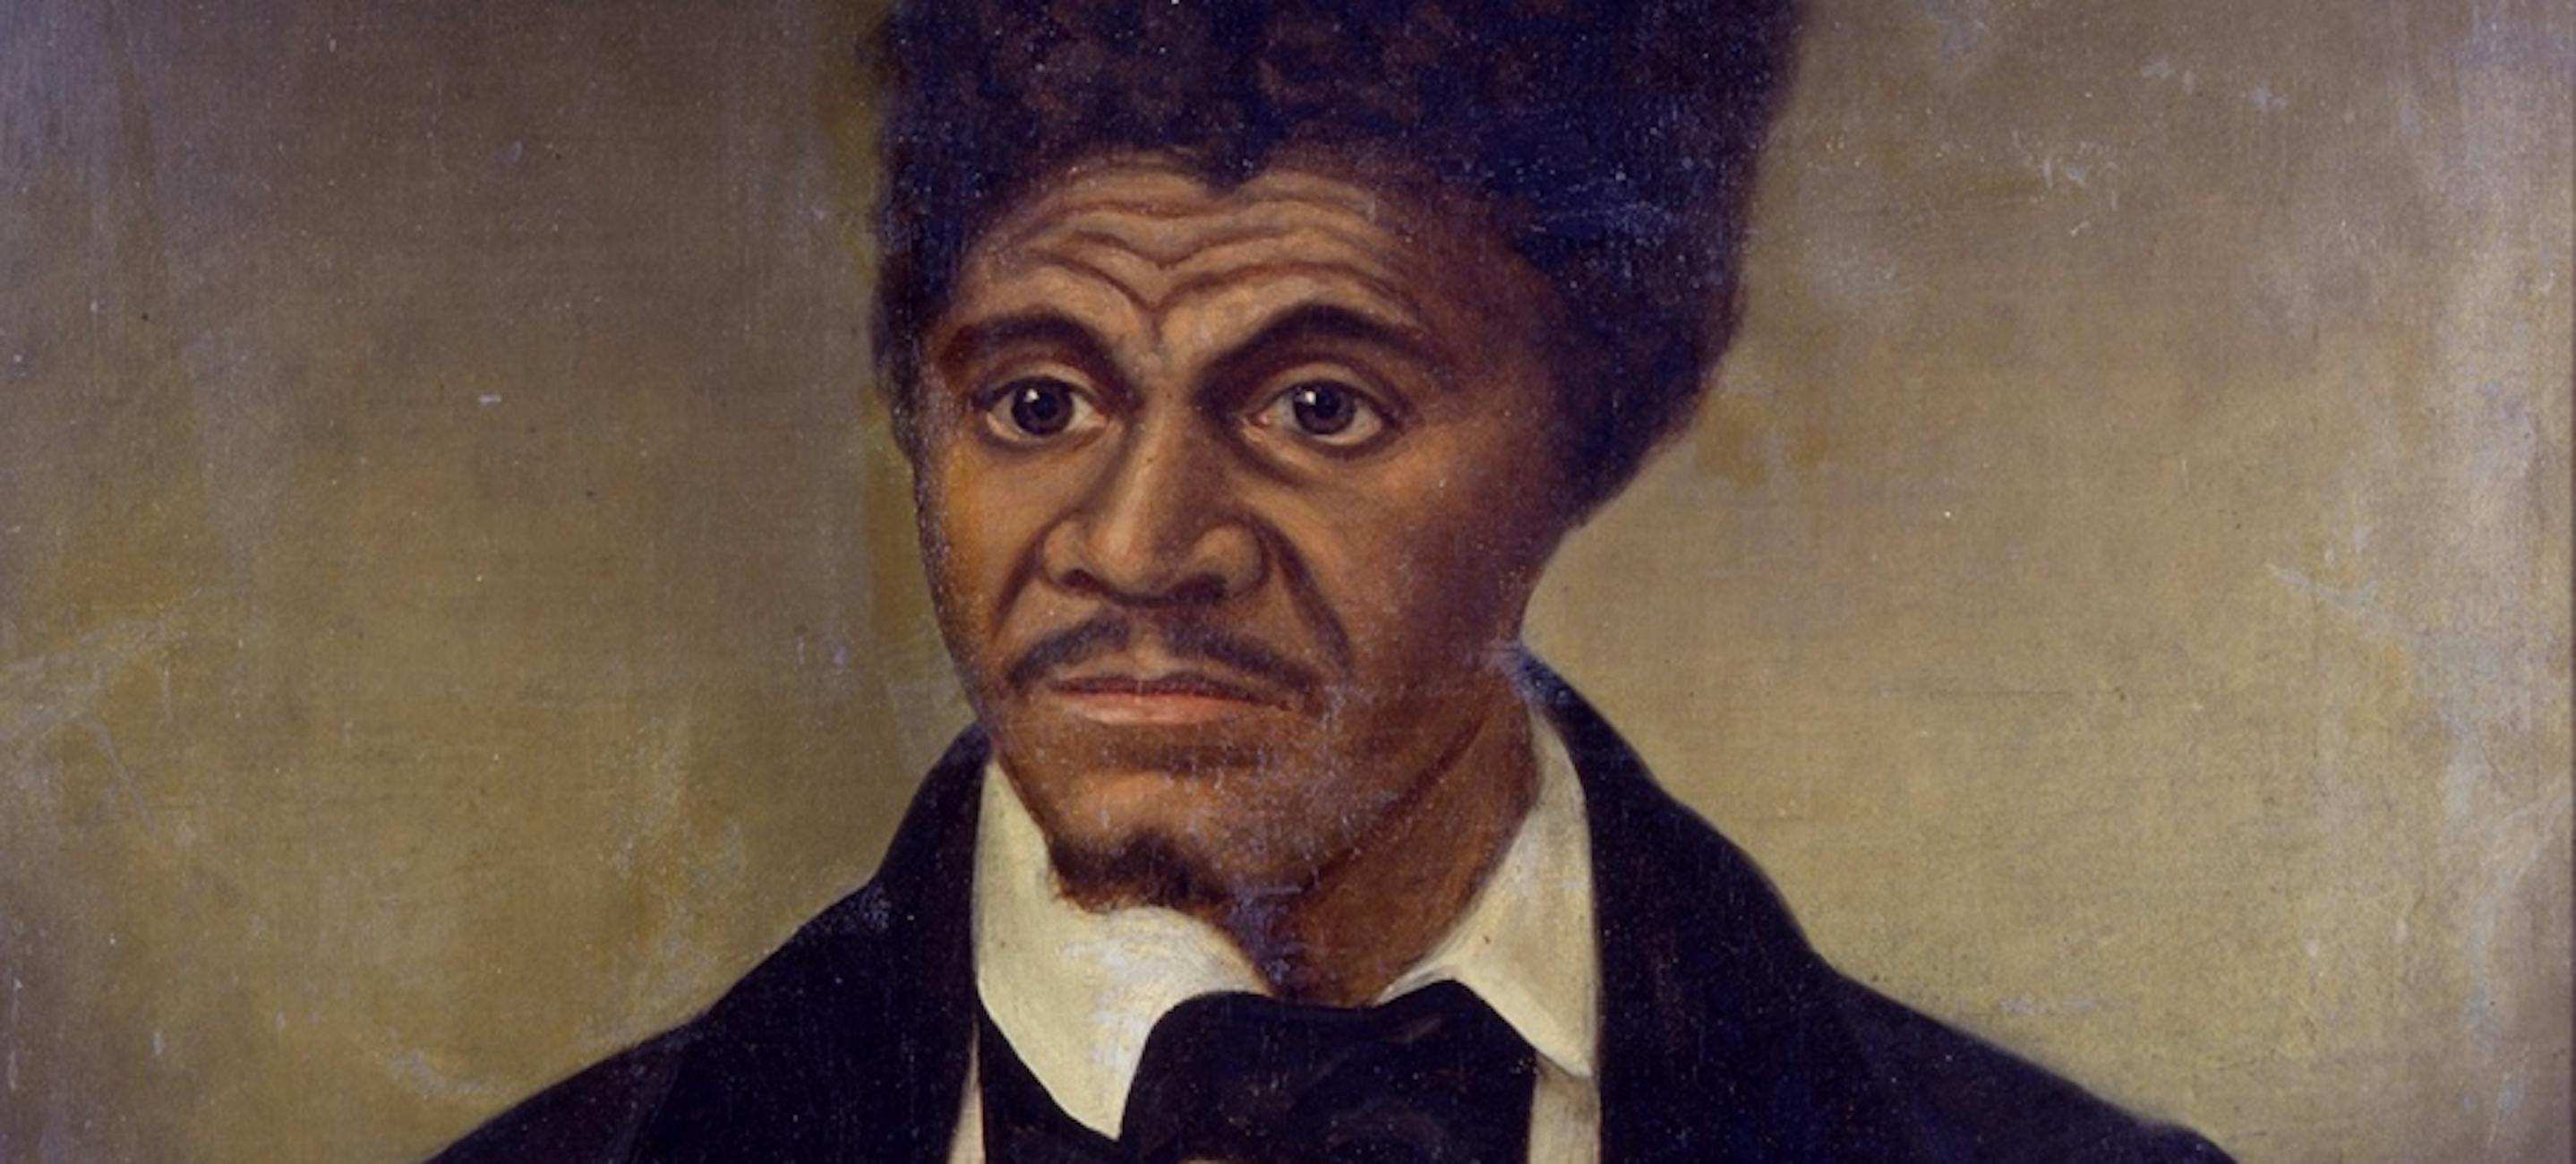 Unidentified artist. Dred Scott, after 1857. Oil on canvas. New-York Historical Society